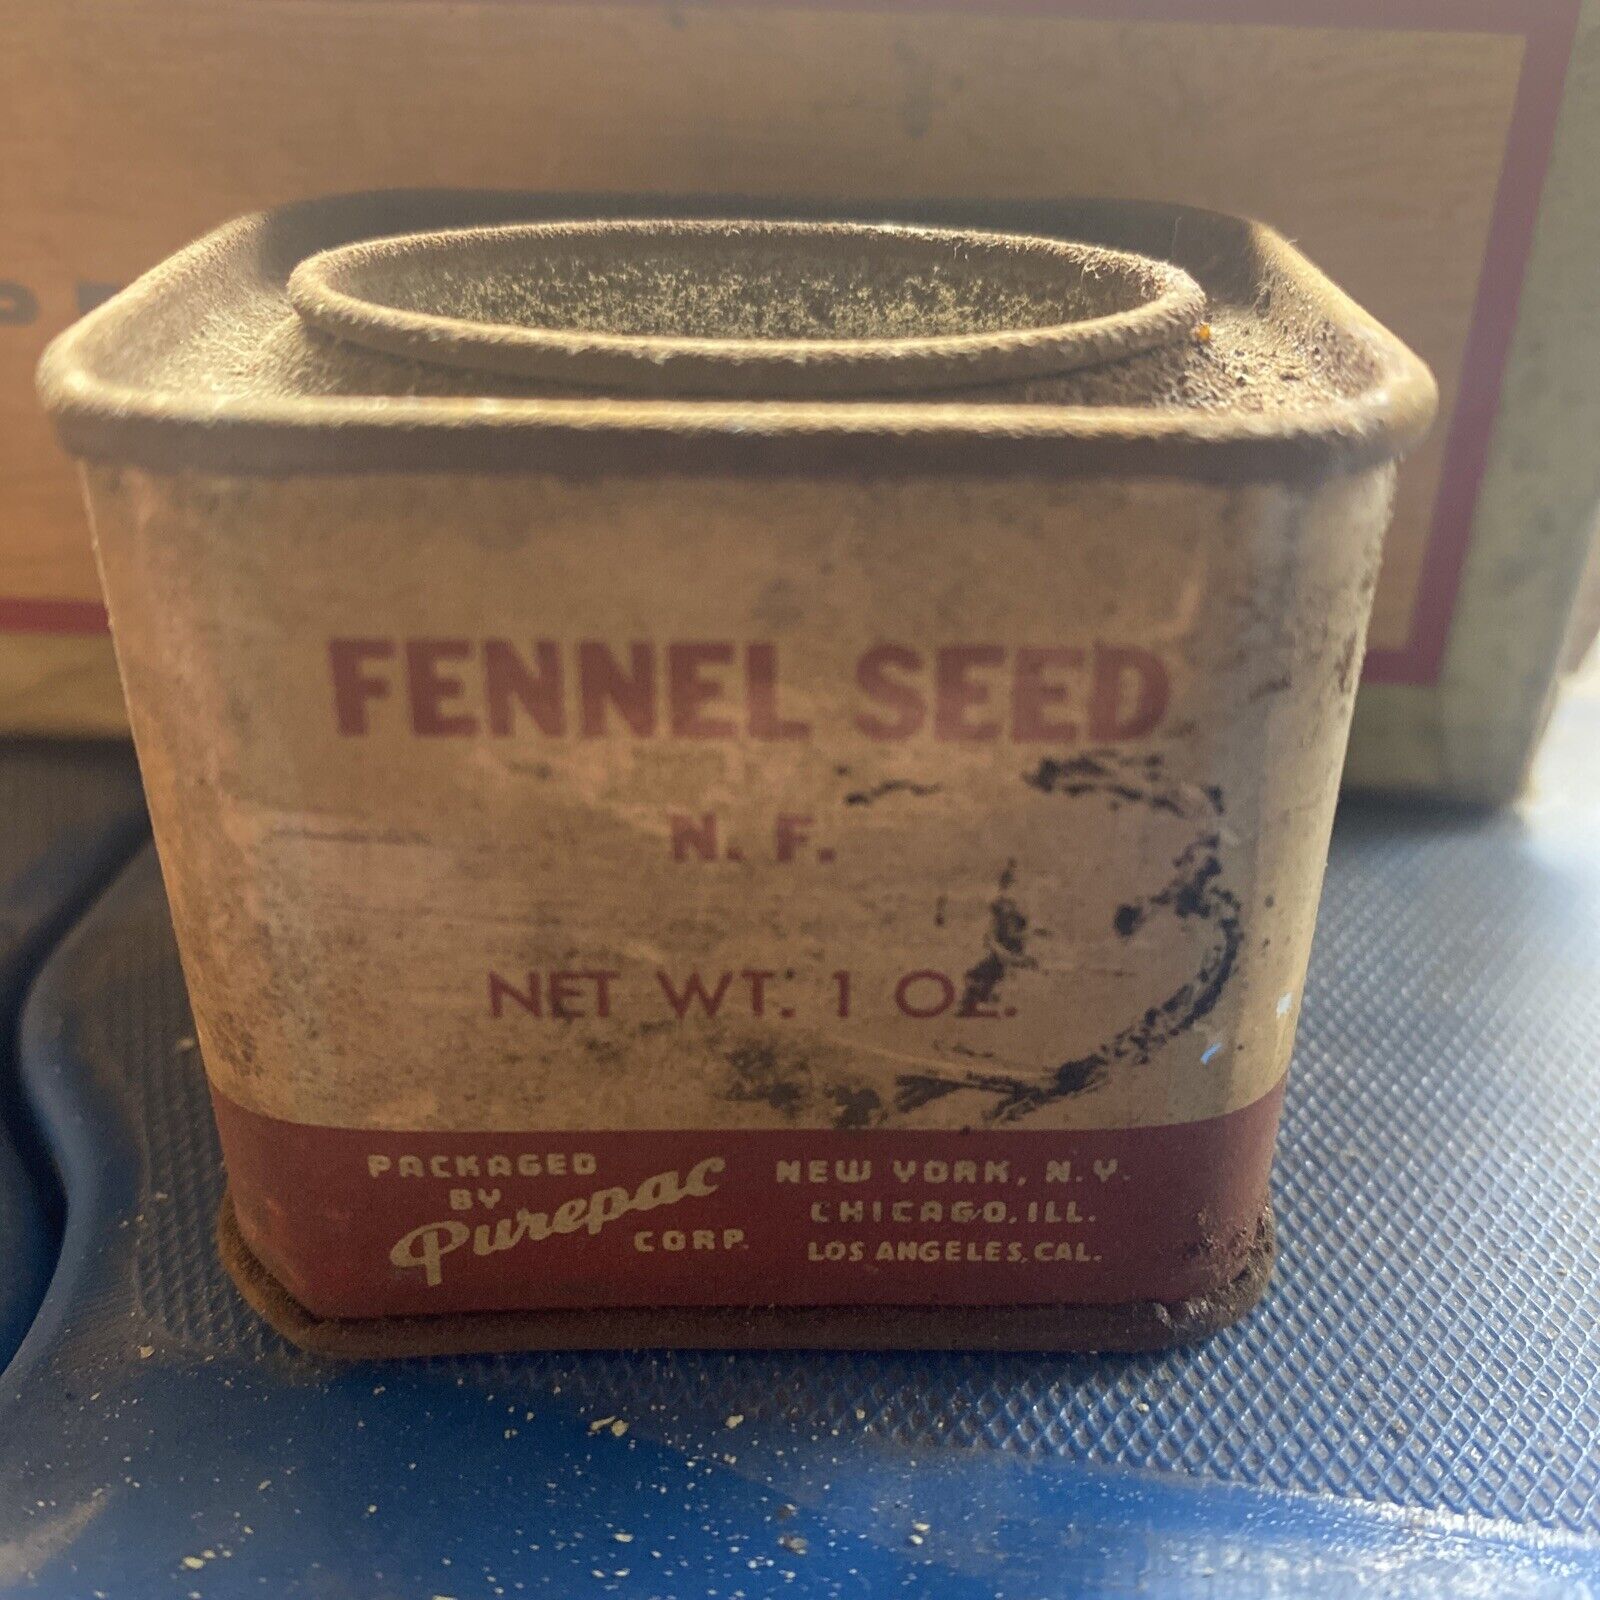 Vintage Fennel Seed Tin 1 Oz Packaged By Purepac